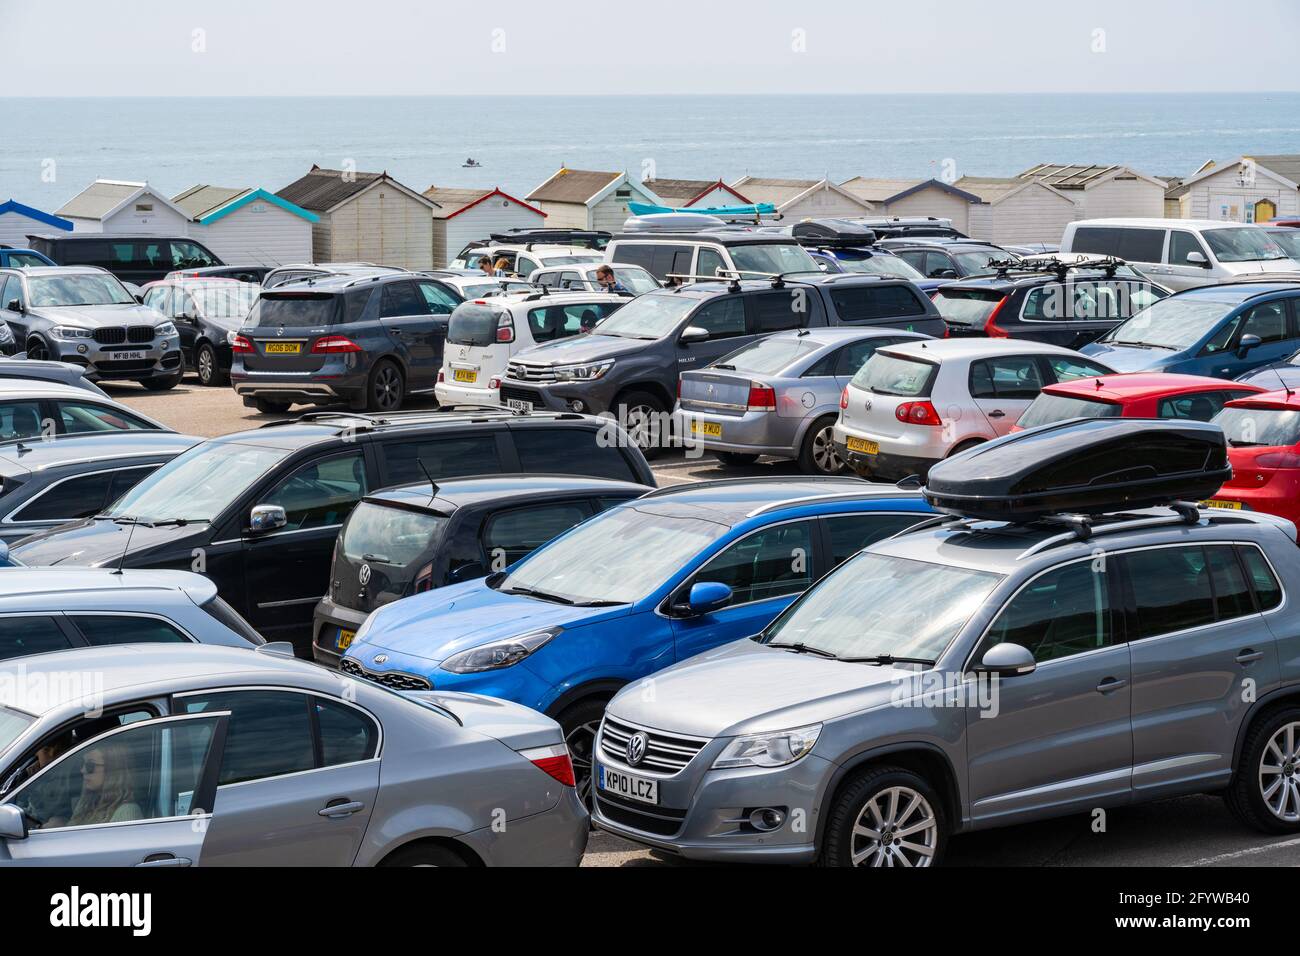 Lyme Regis, Dorset, UK. 30th May, 2021. UK Weather. The car parks at Lyme Regis were packed to capacity as peopled flocked to the beach to enjoy scorching hot sunsine as the heatwave continues. Credit: Celia McMahon/Alamy Live News Stock Photo